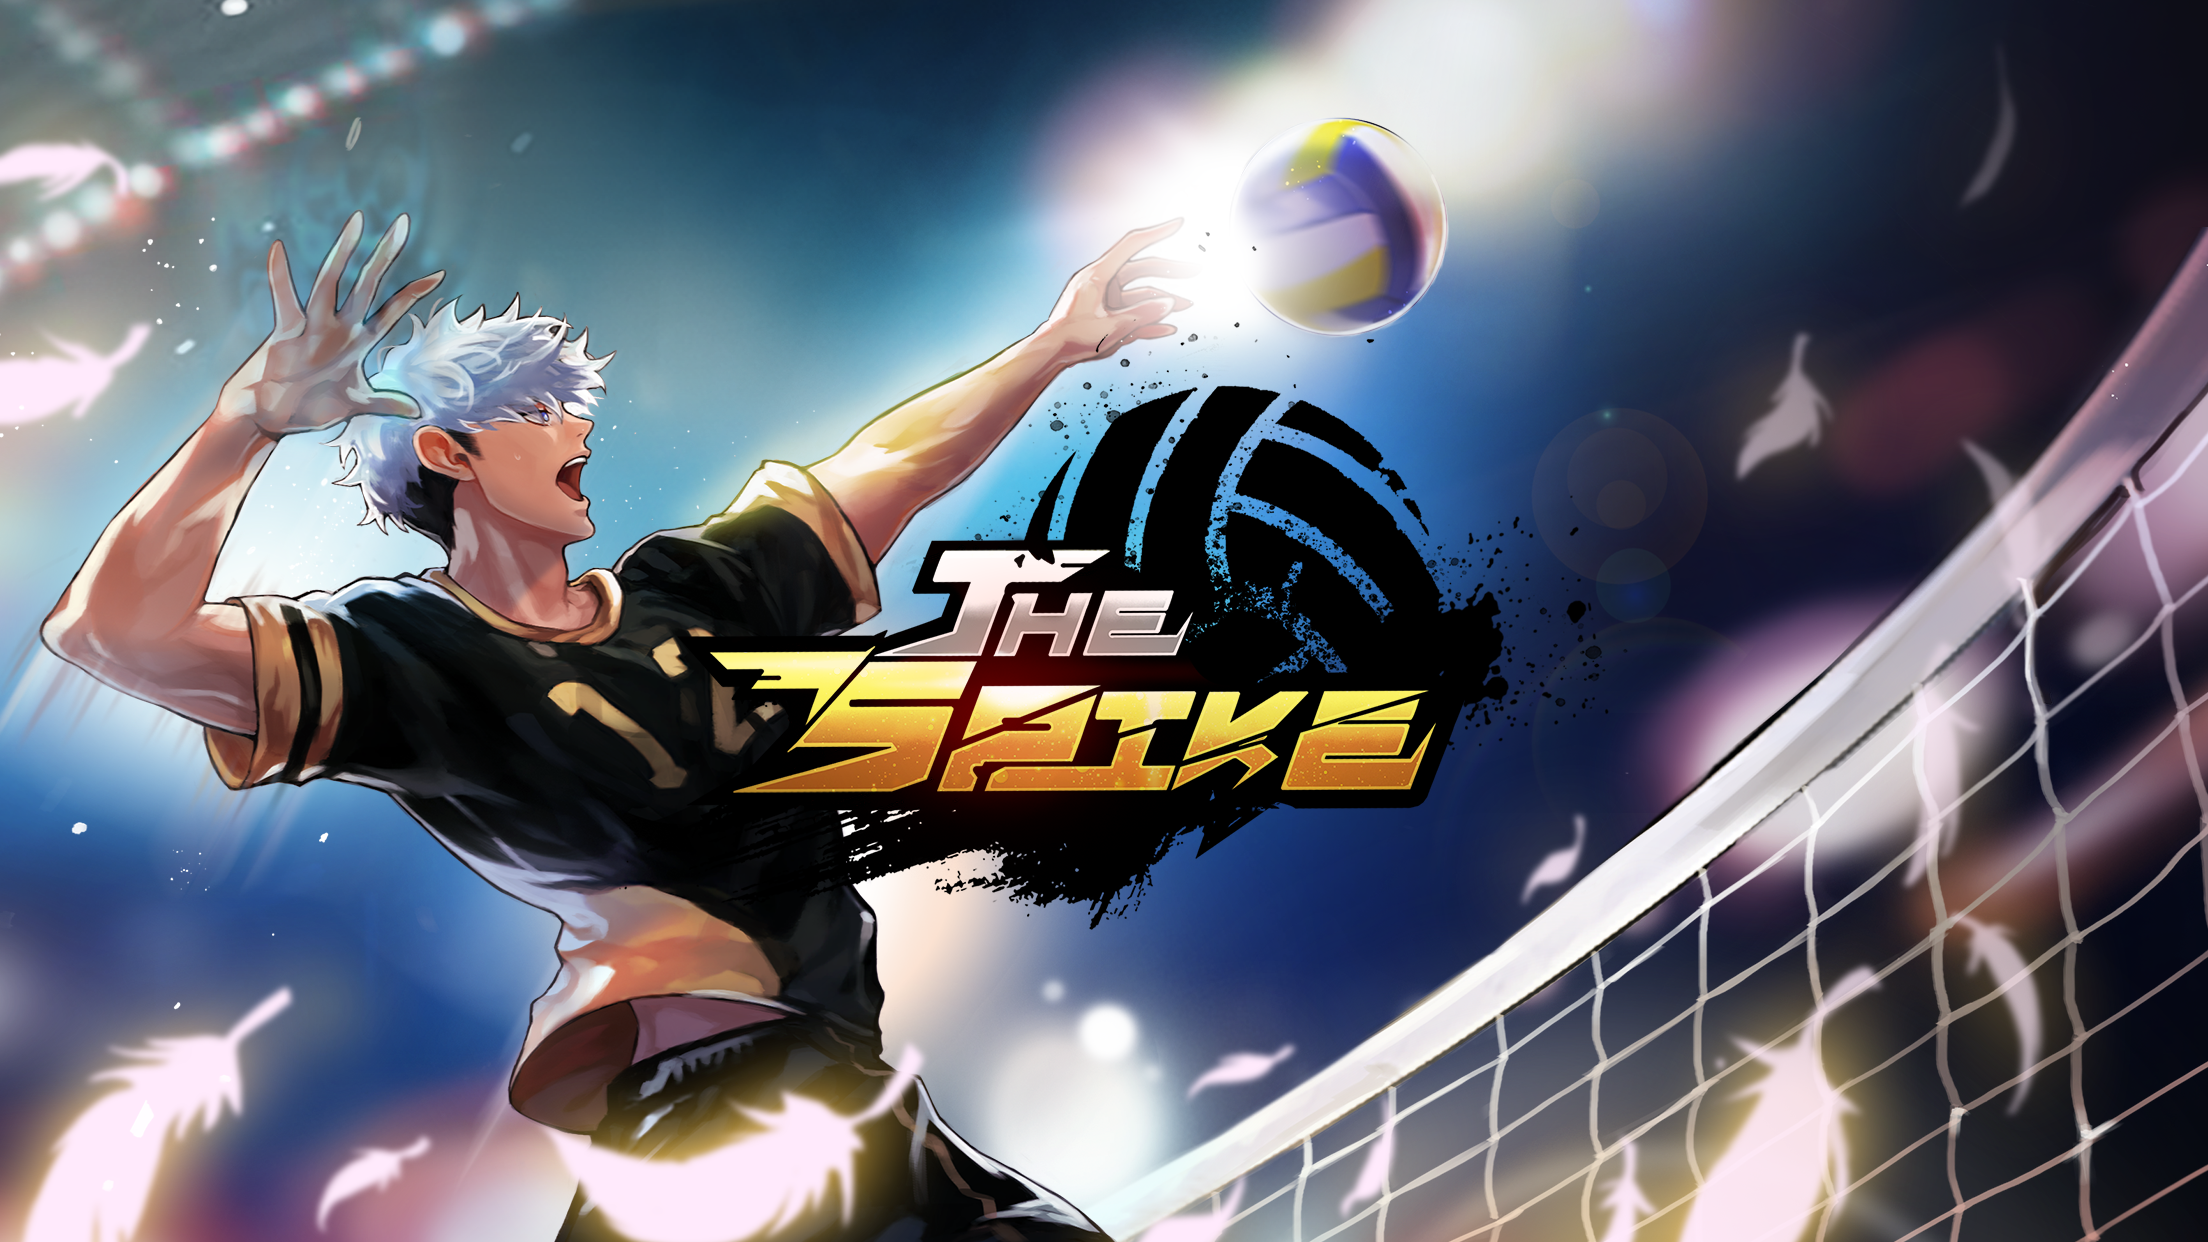 The Spike - Volleyball Story游戏截图